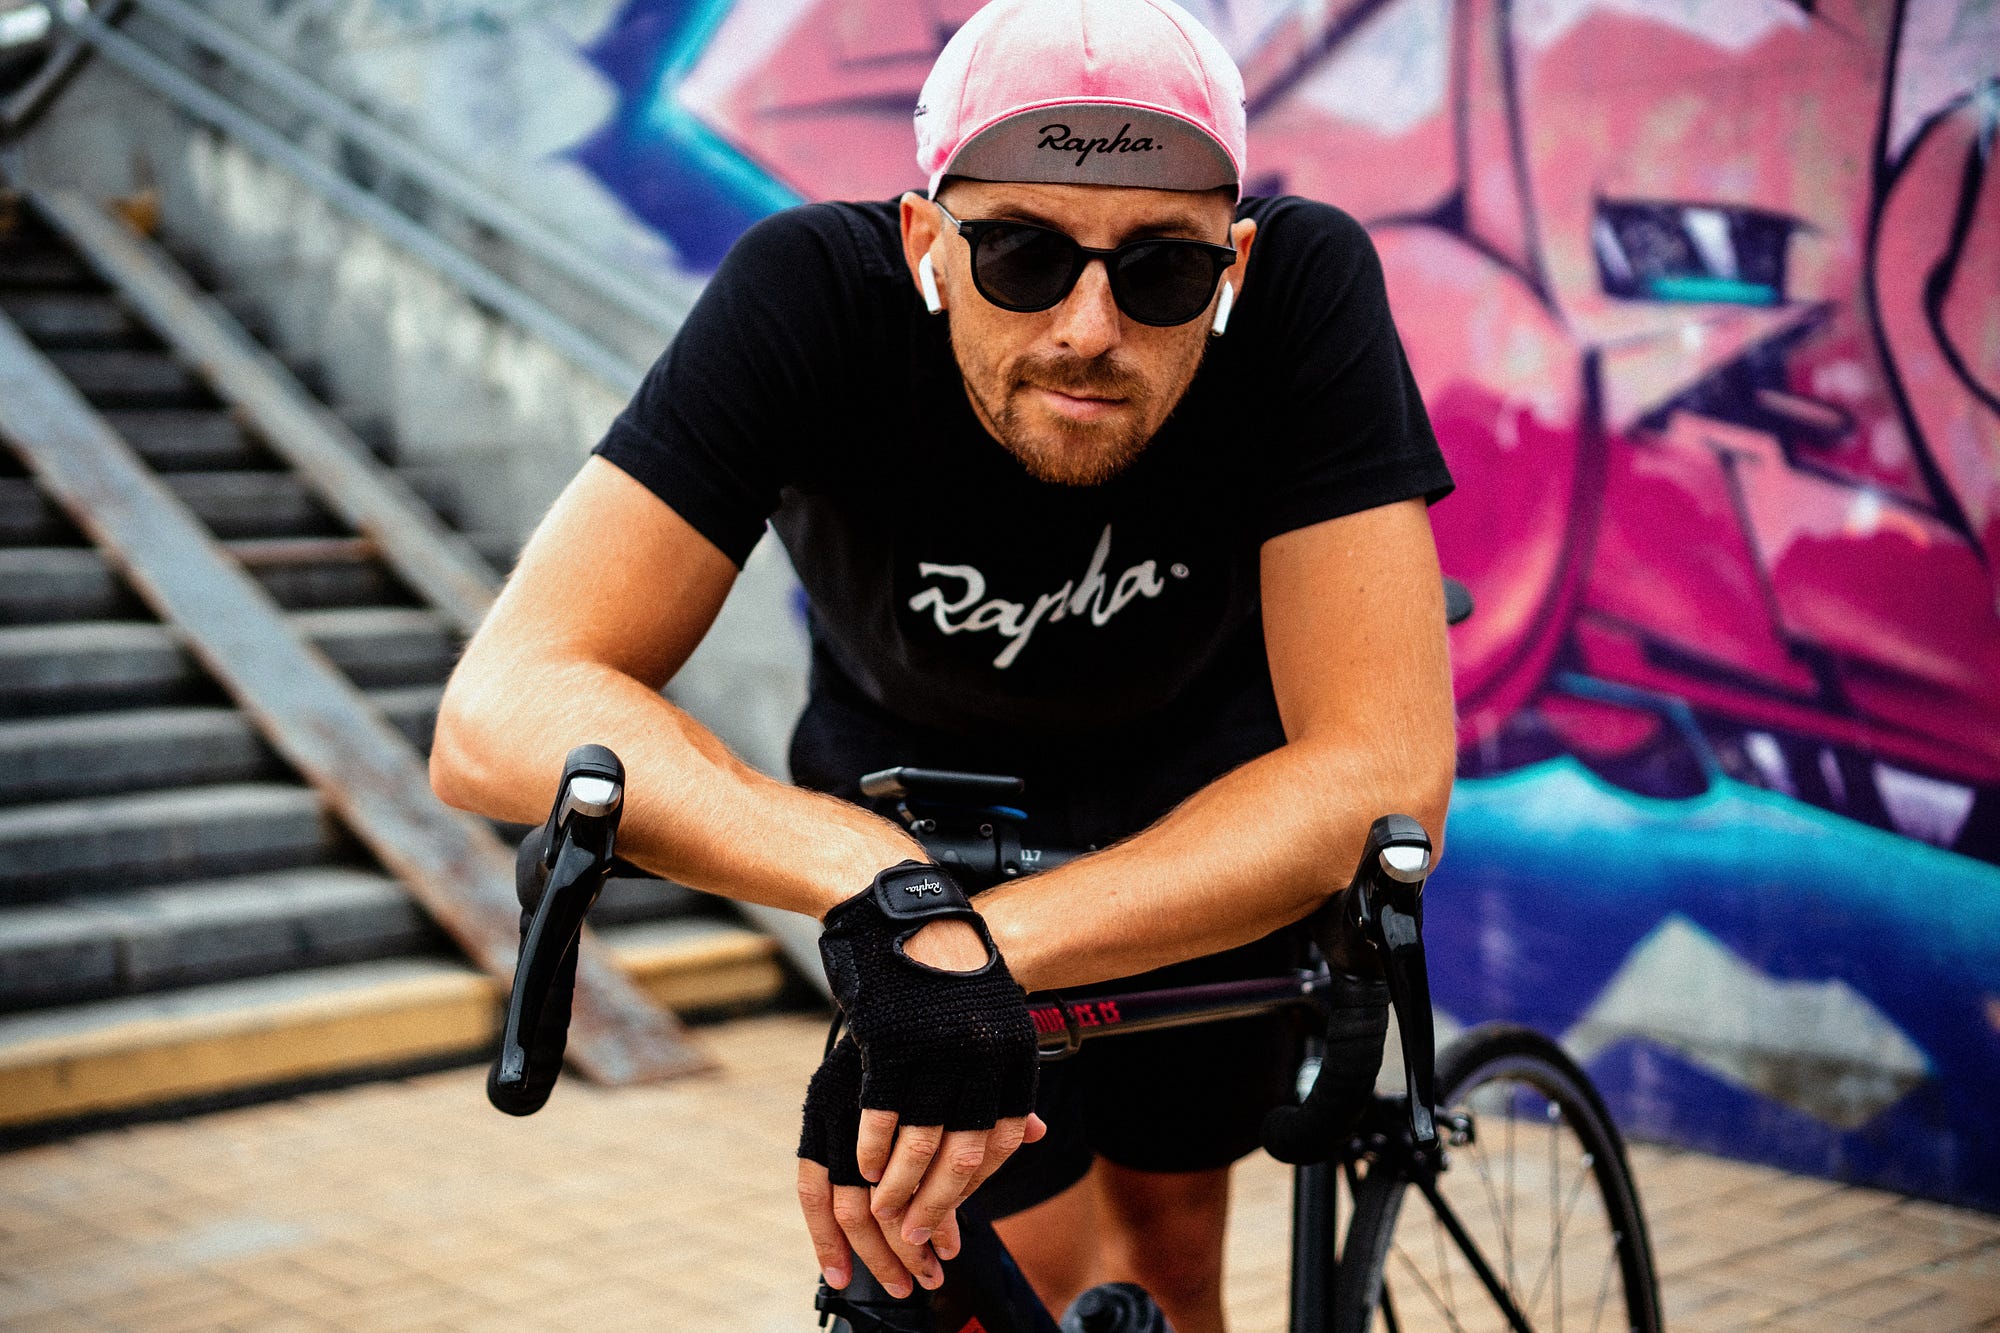 This Cycling Brand Has Truly Loyal Customers by Jonah Malin Better Marketing